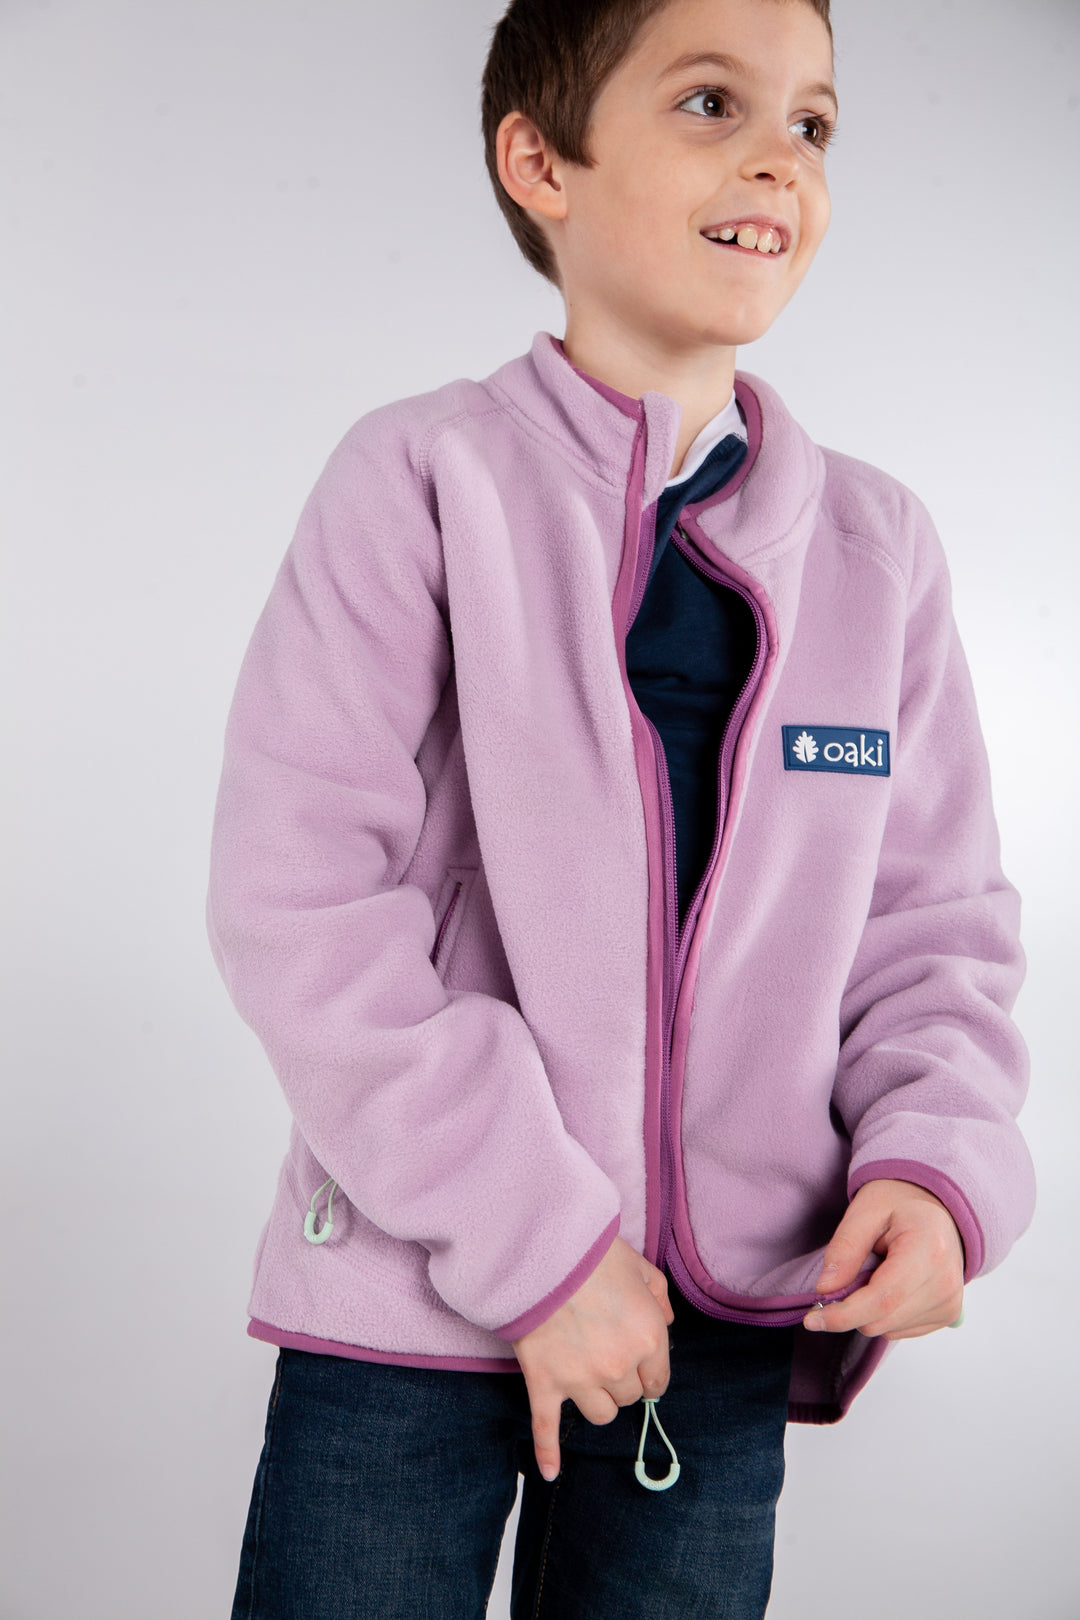 OAKI 200 Series Polartec Fleece Jacket in Lavender (Sizing Runs Small, Recommend Sizing Up)